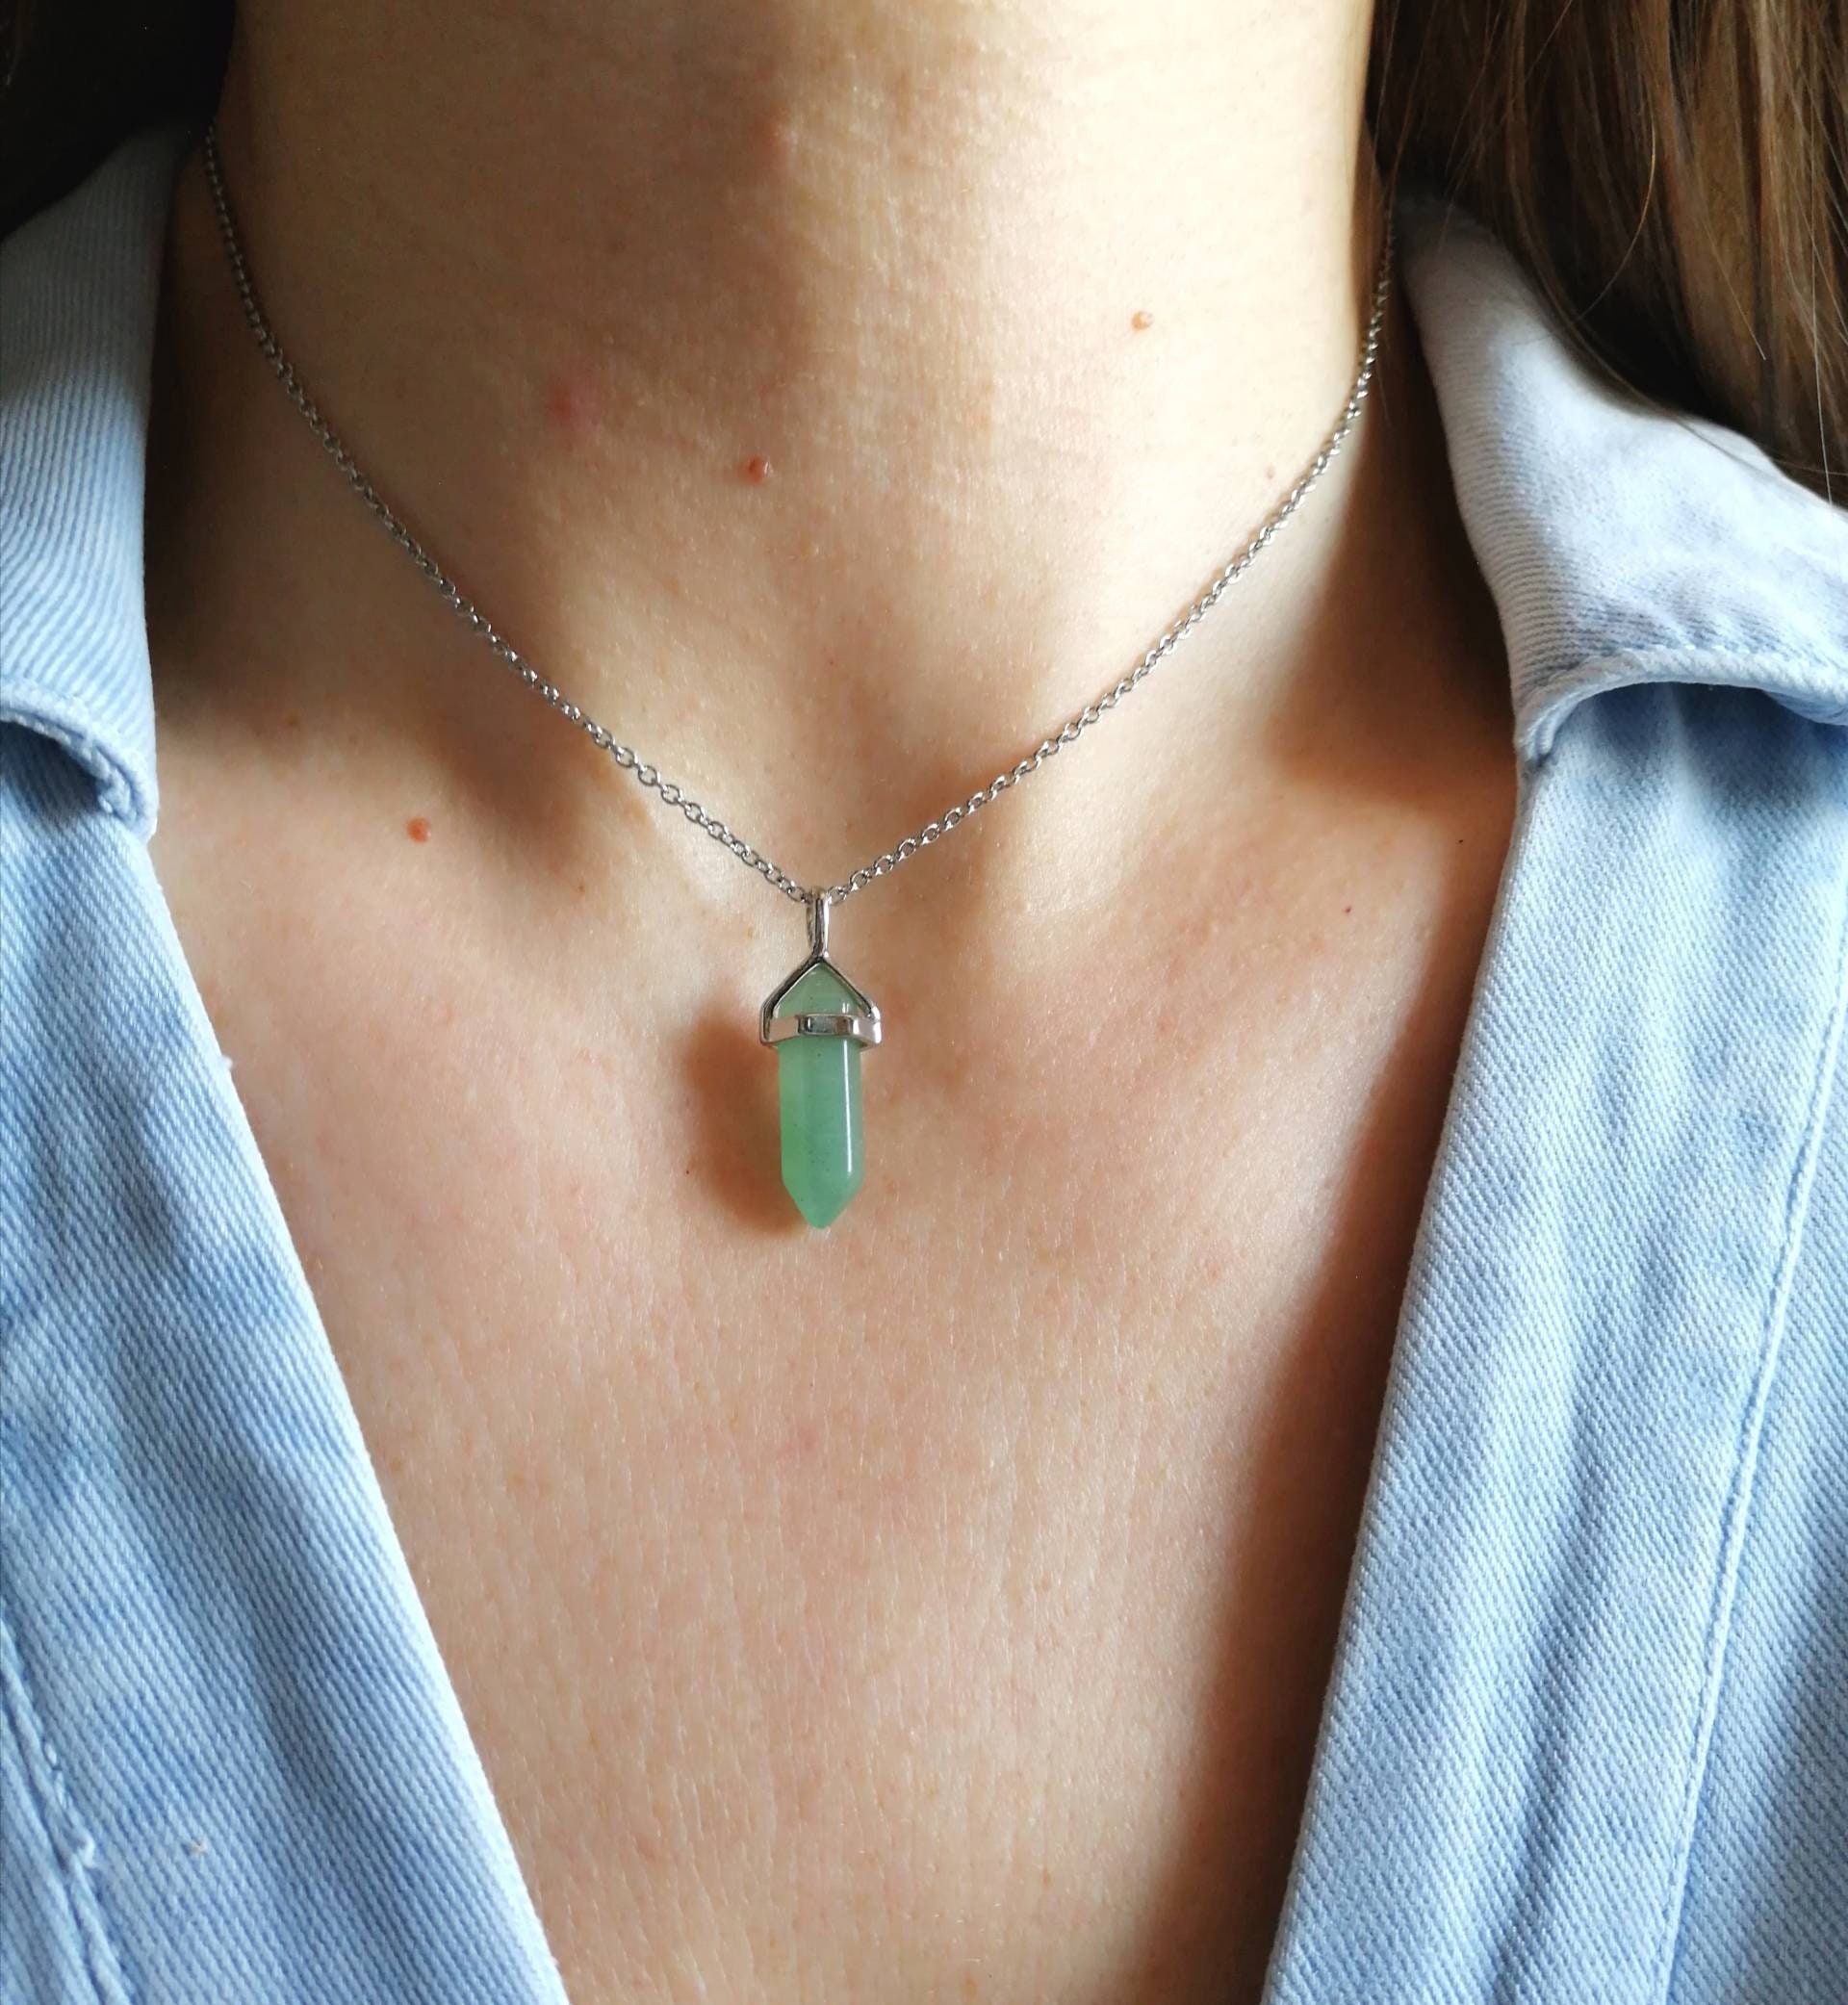 A woman wearing a Green Aventurine necklace